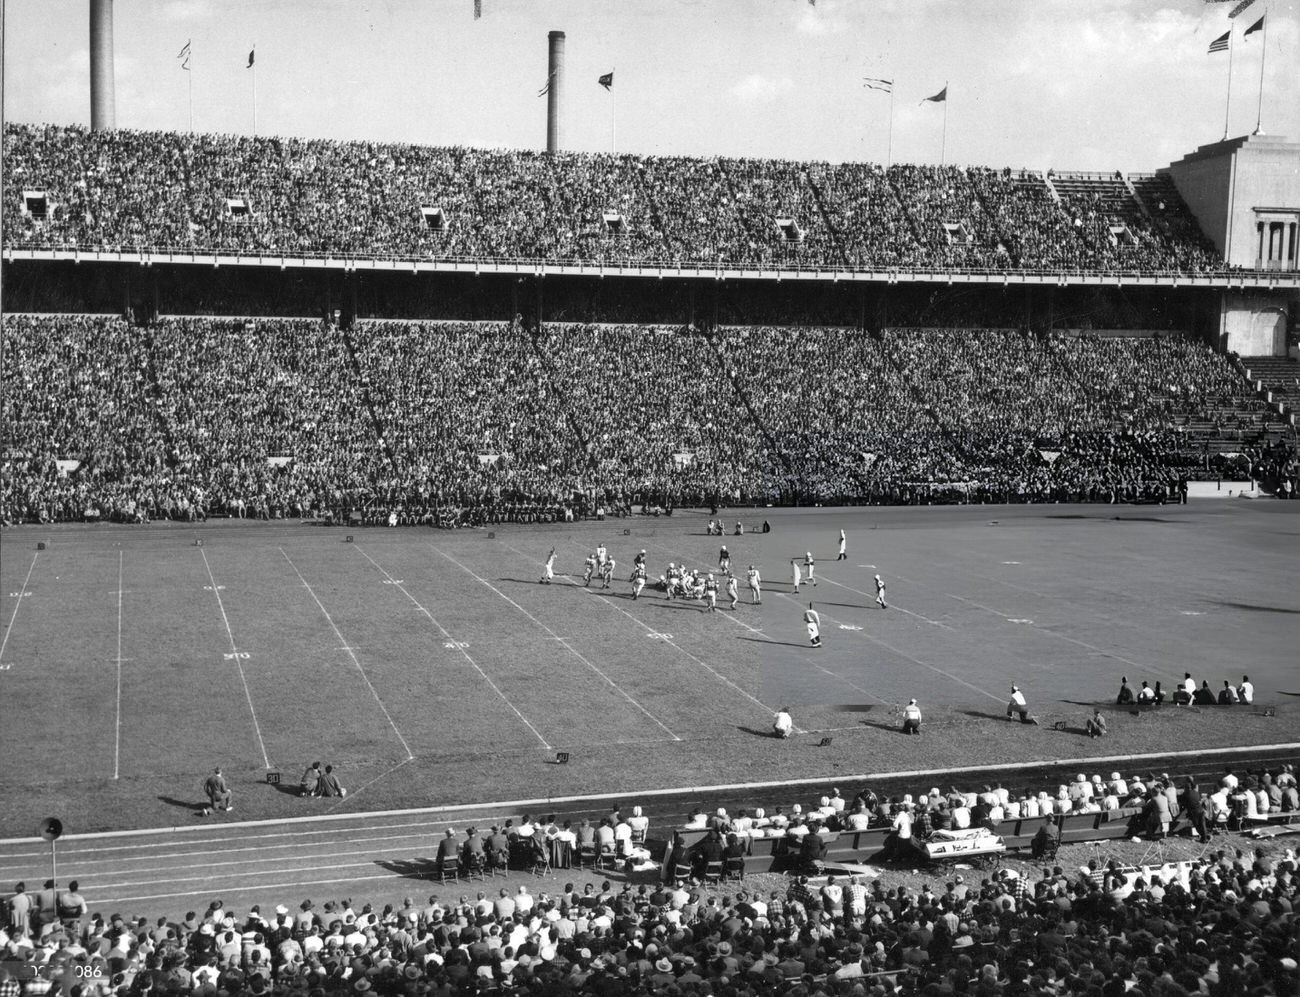 On-field action during a football game between Ohio State University and the University of Iowa at Ohio Stadium, Columbus, Ohio, 1948, with Iowa winning 14-7